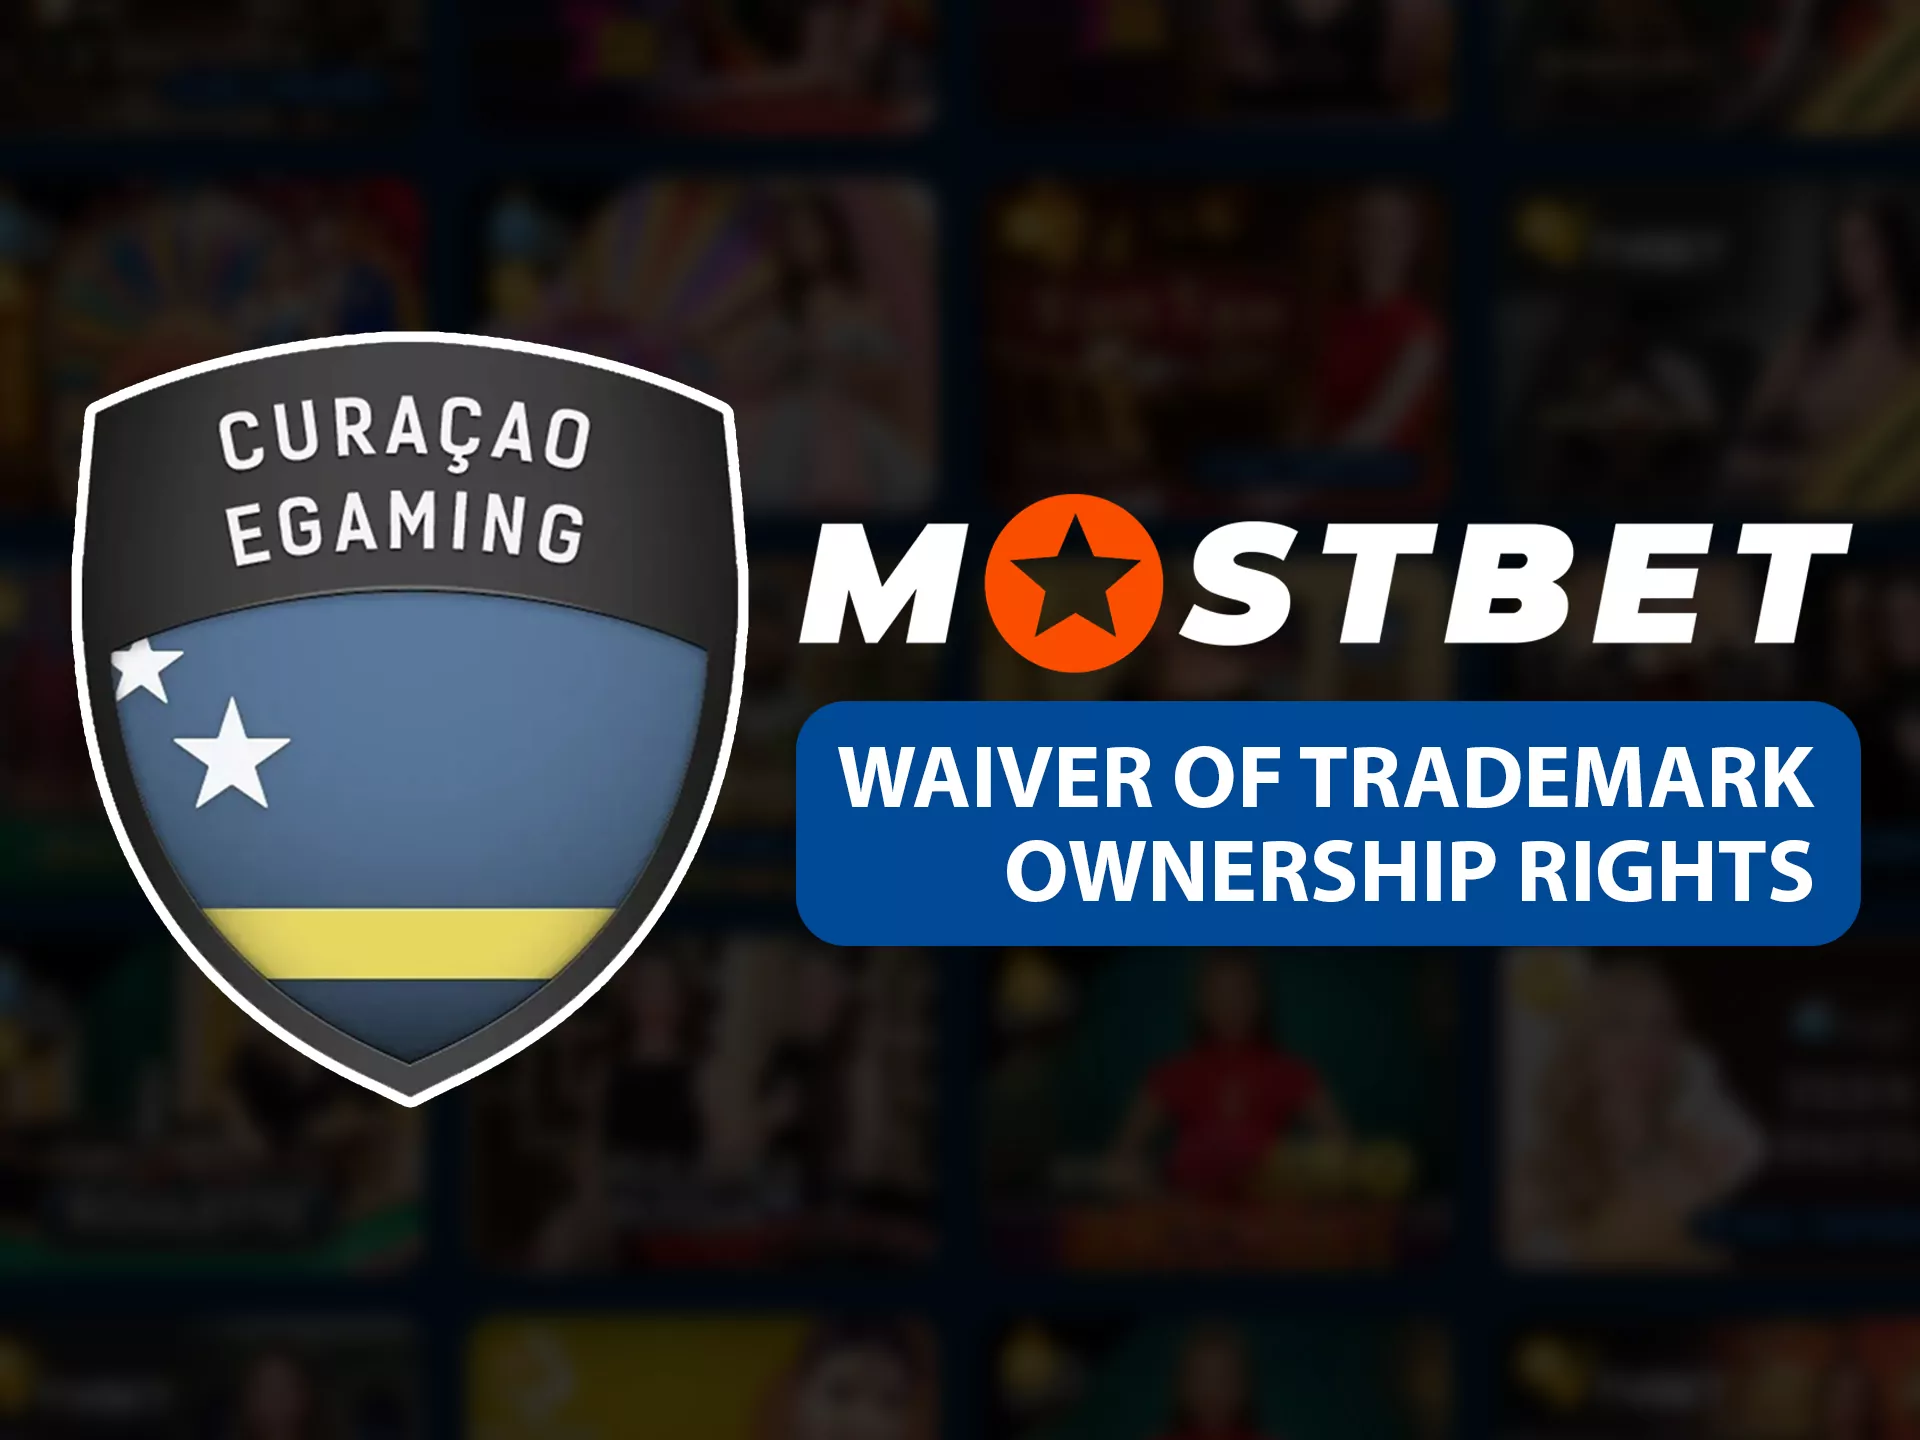 Mostbet must waiver of trademark ownership rights.